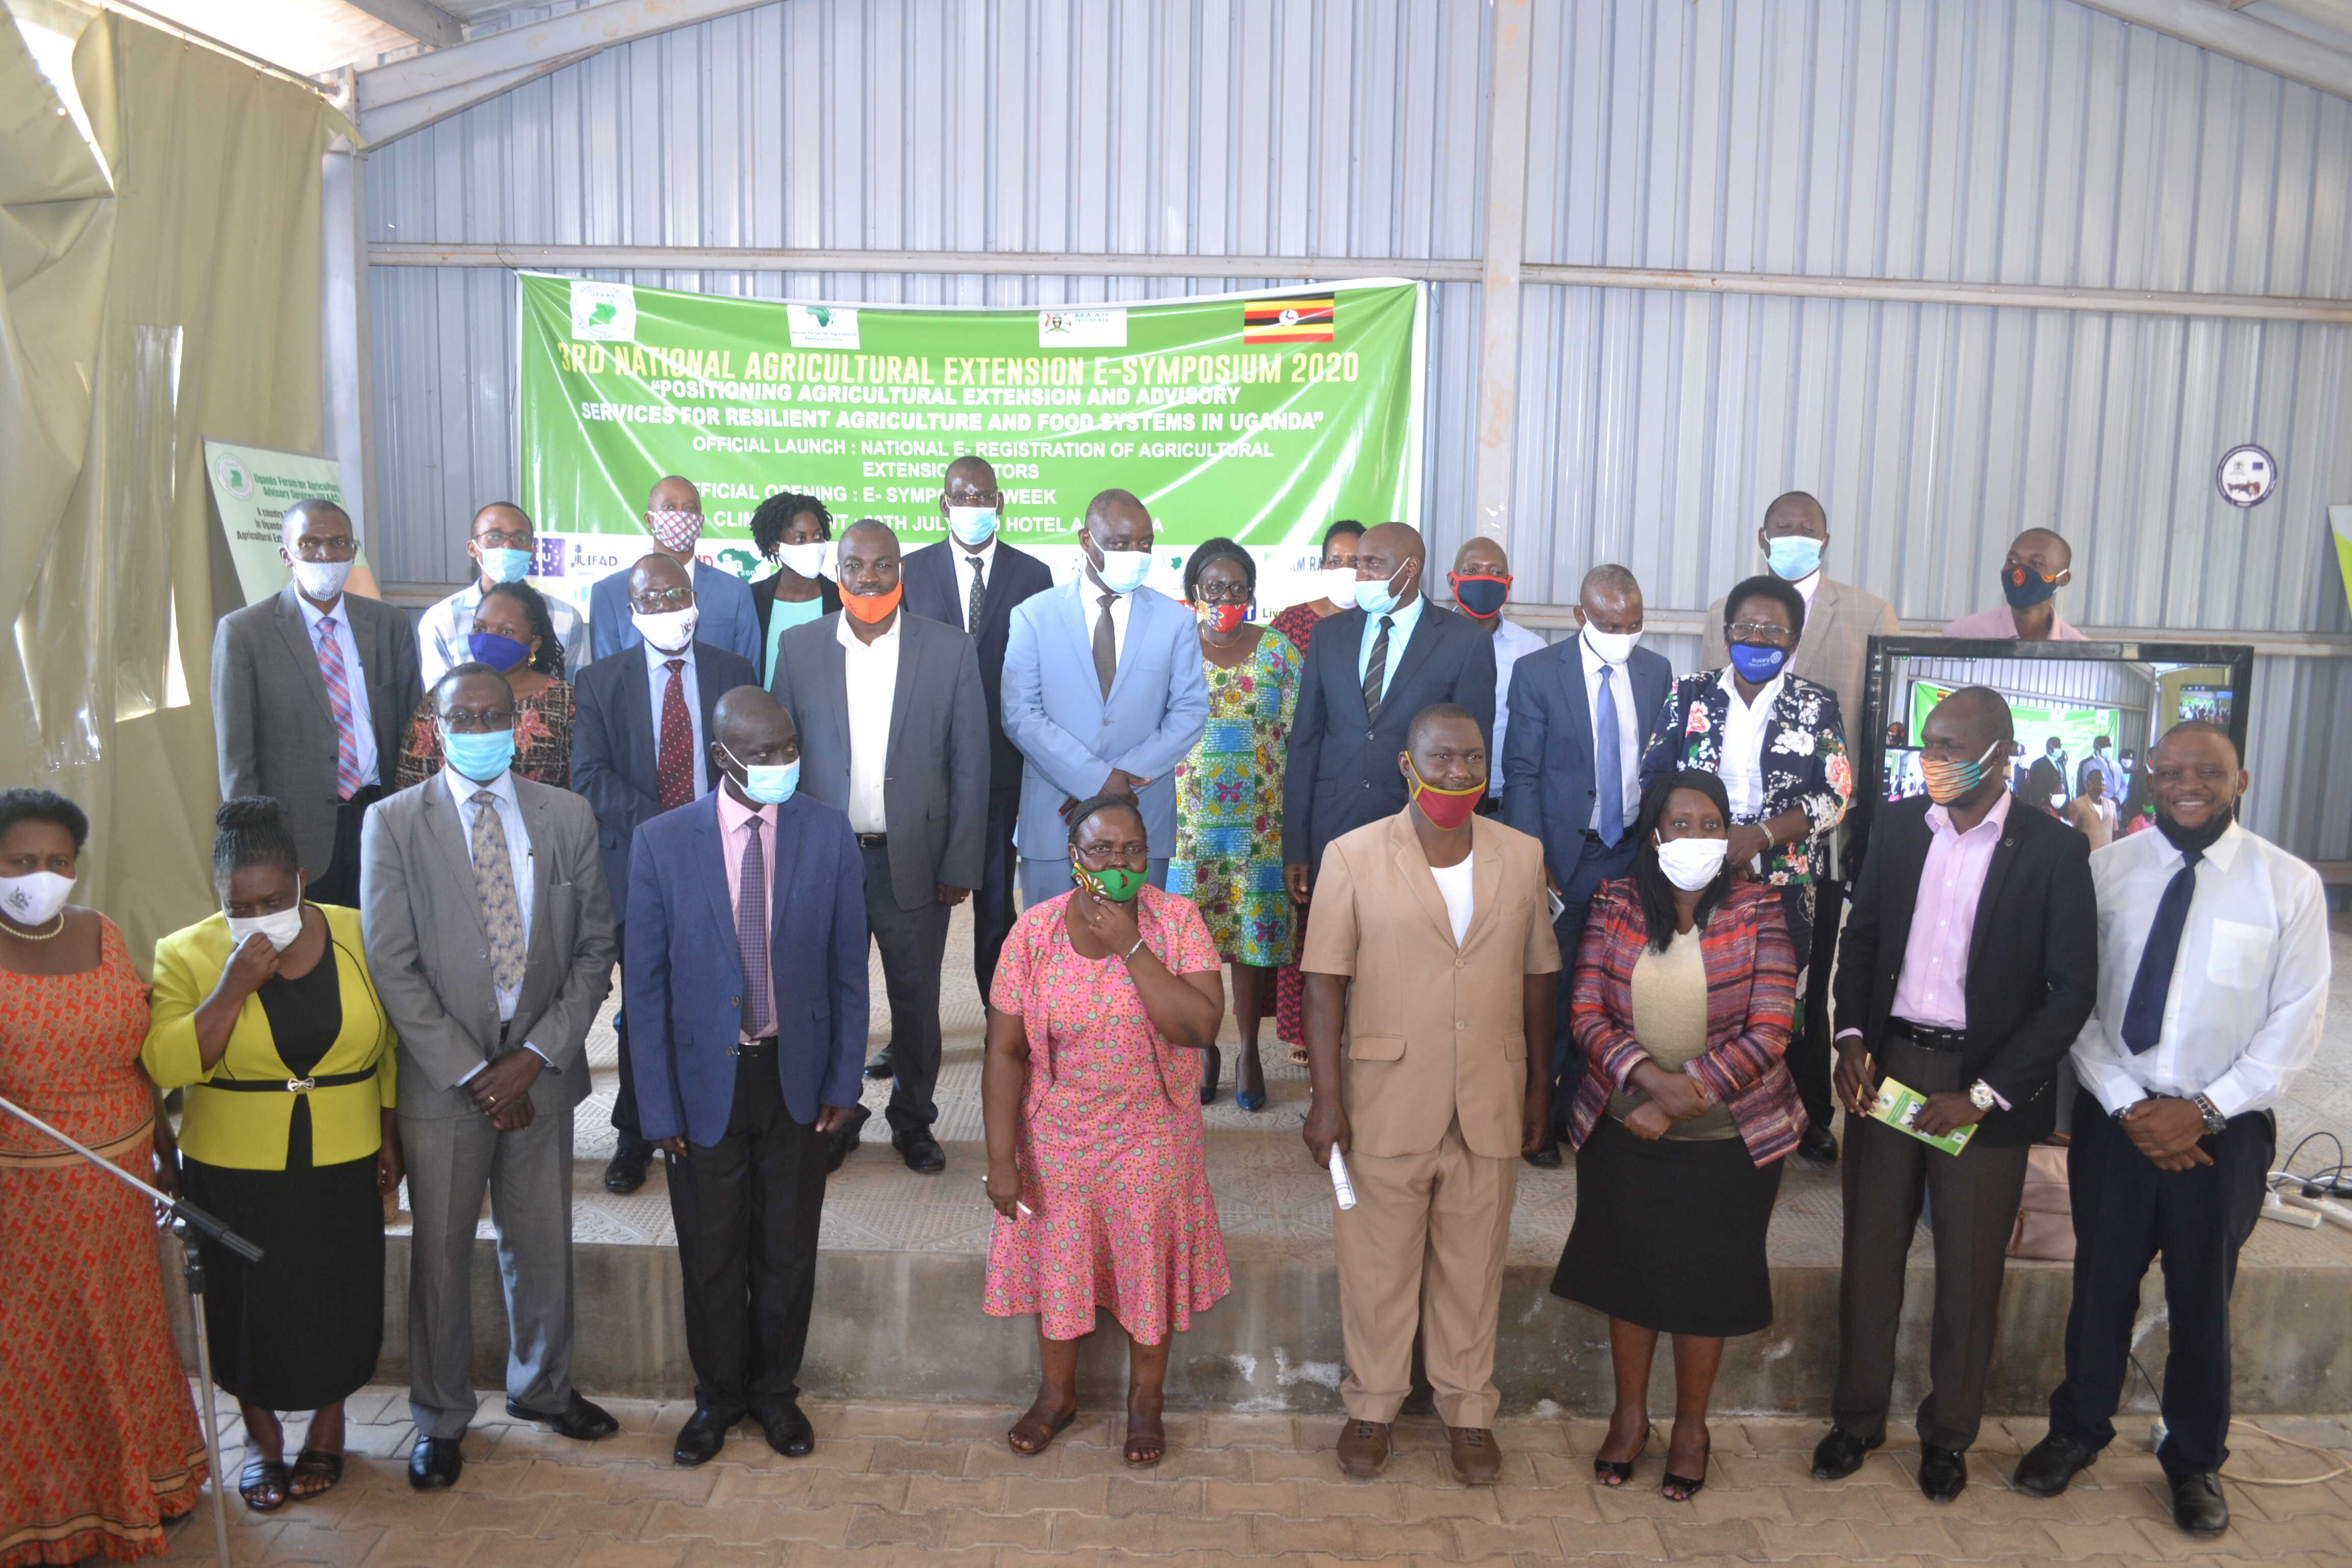 UFAAS organizes Africa’s first e-Agricultural Extension Symposium: Minister launches an e-registration process for agricultural extension workers